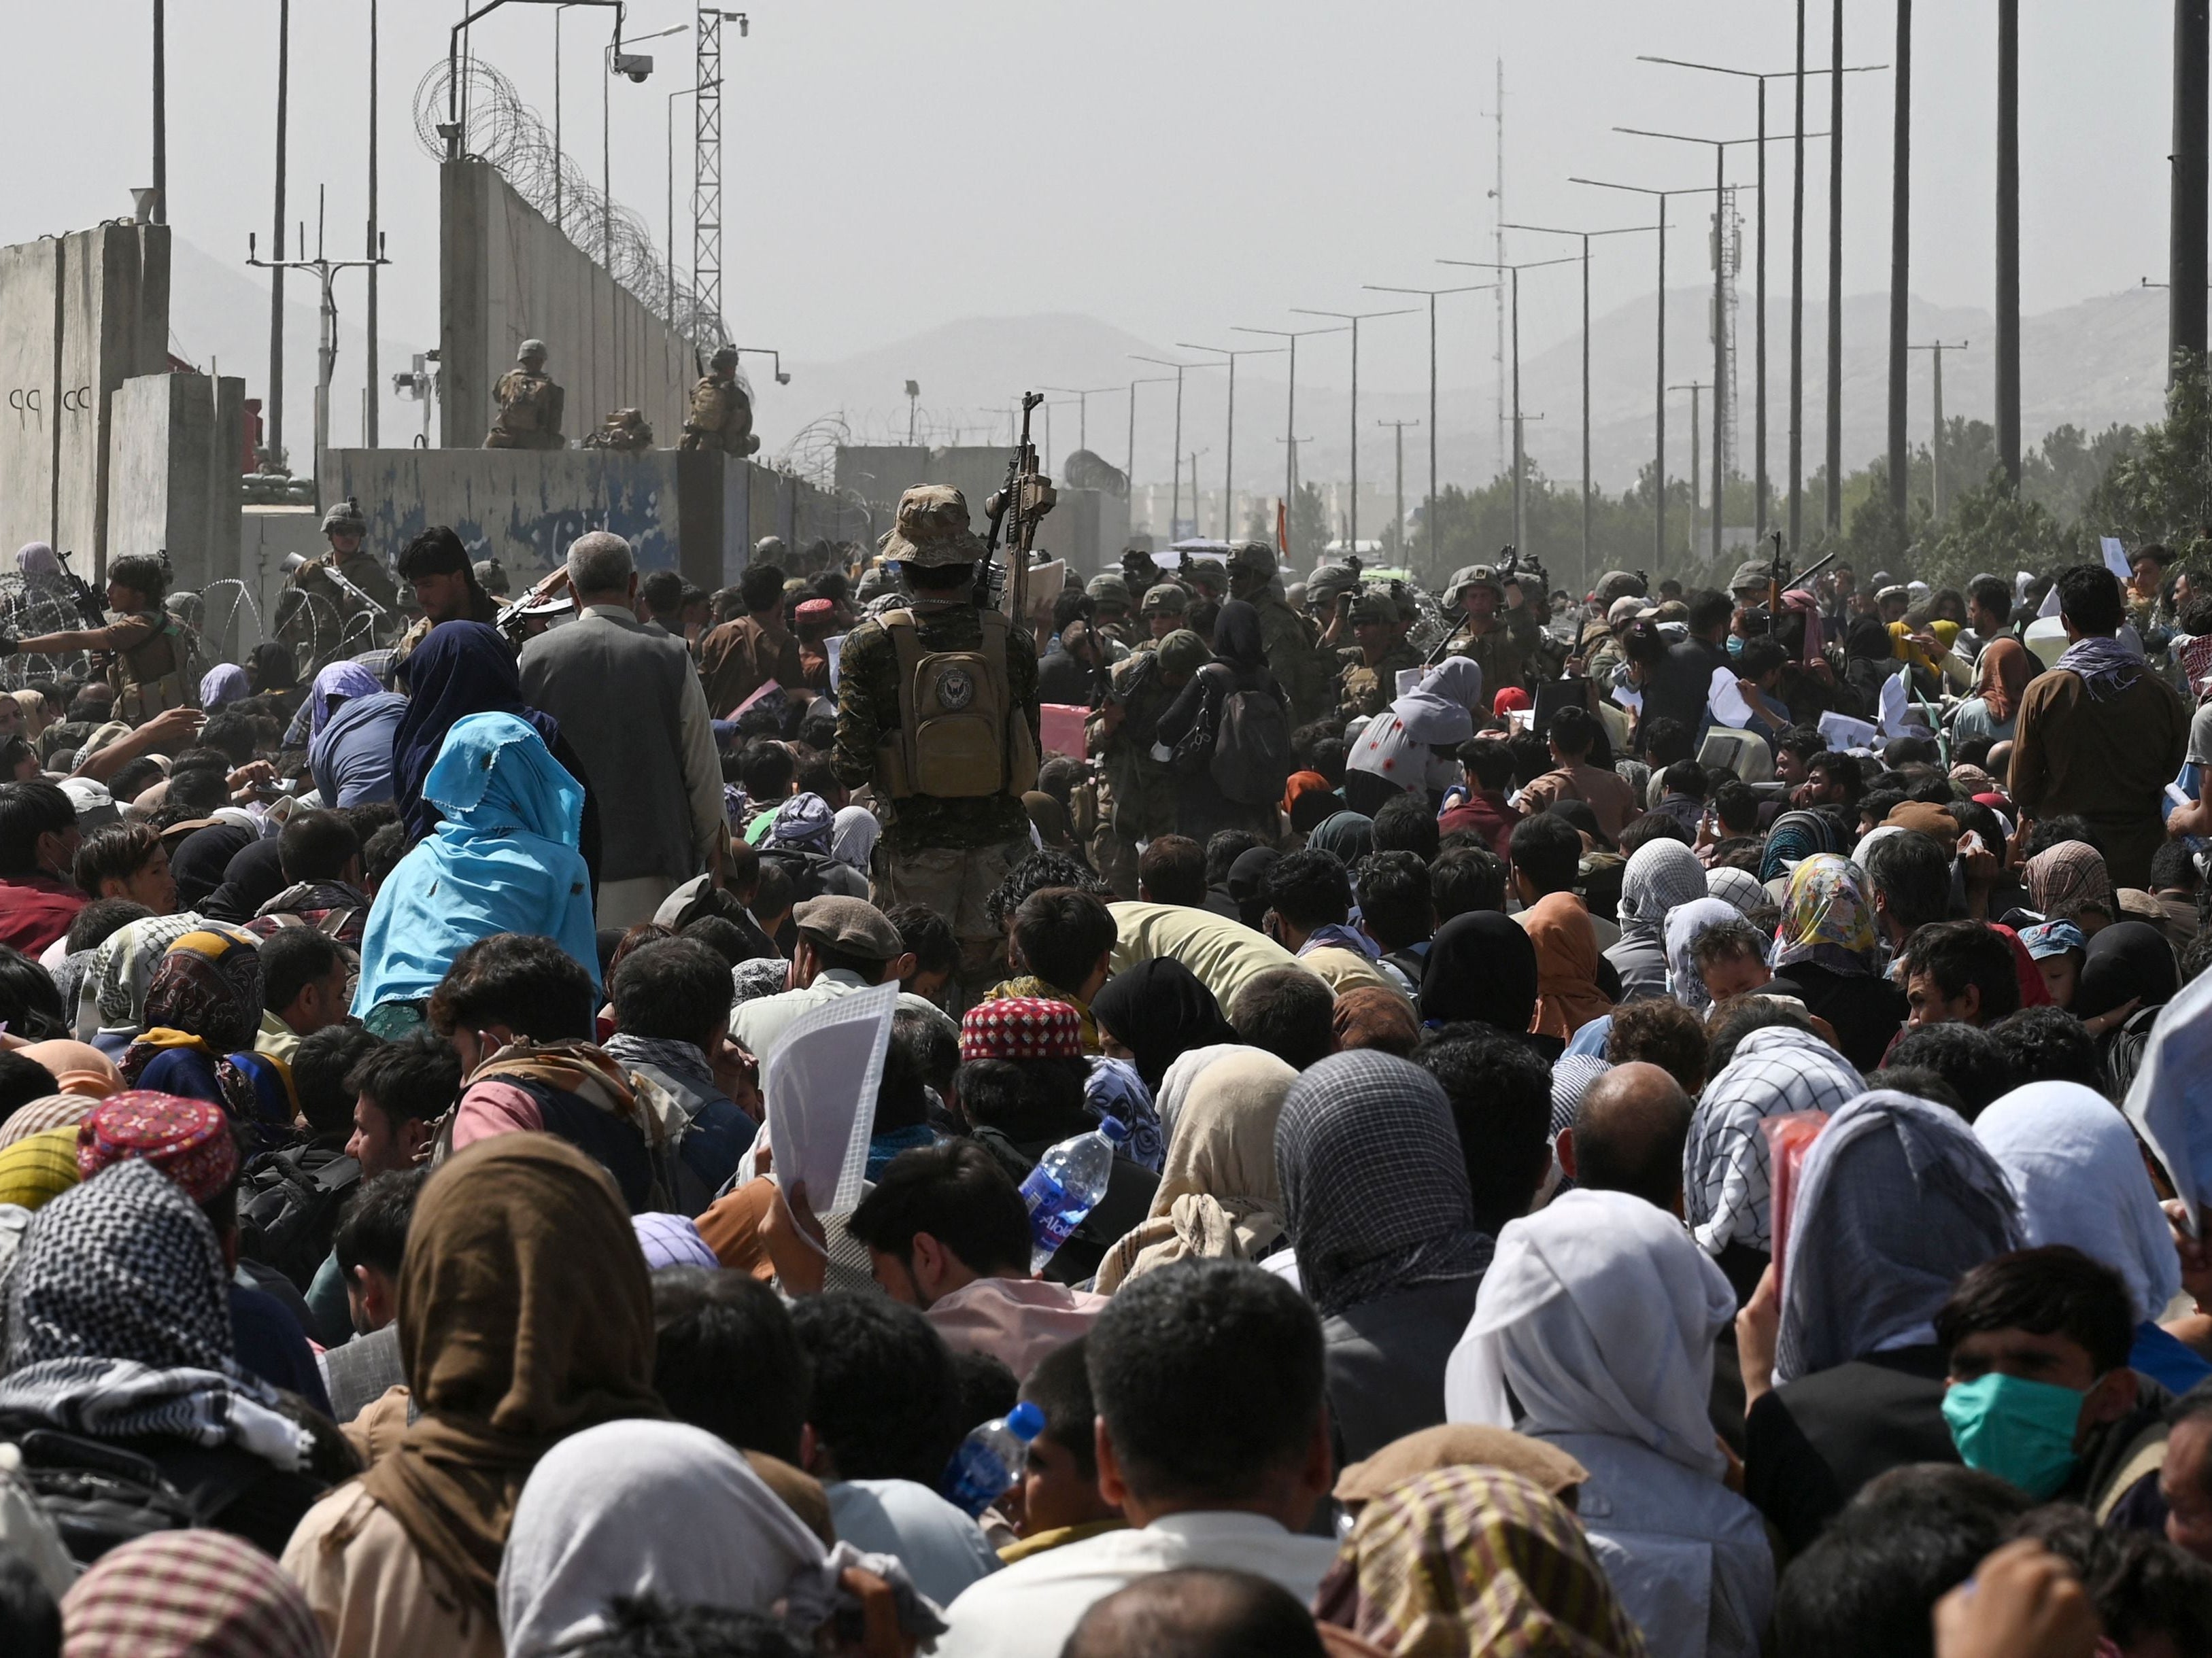 Afghans gather near the airport in Kabul, hoping to flee the country